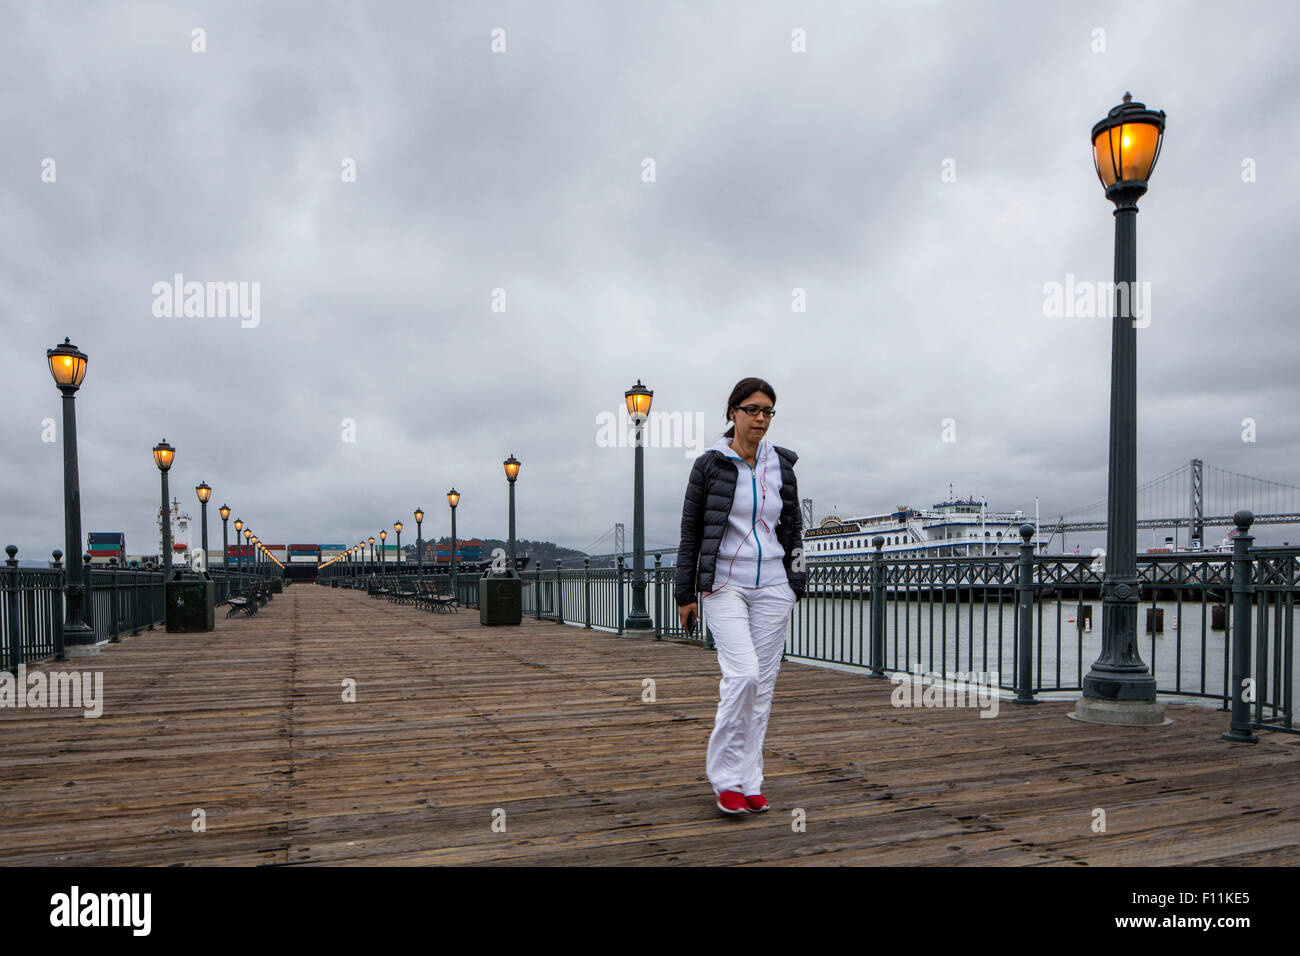 Middle Eastern woman walking on pier Banque D'Images